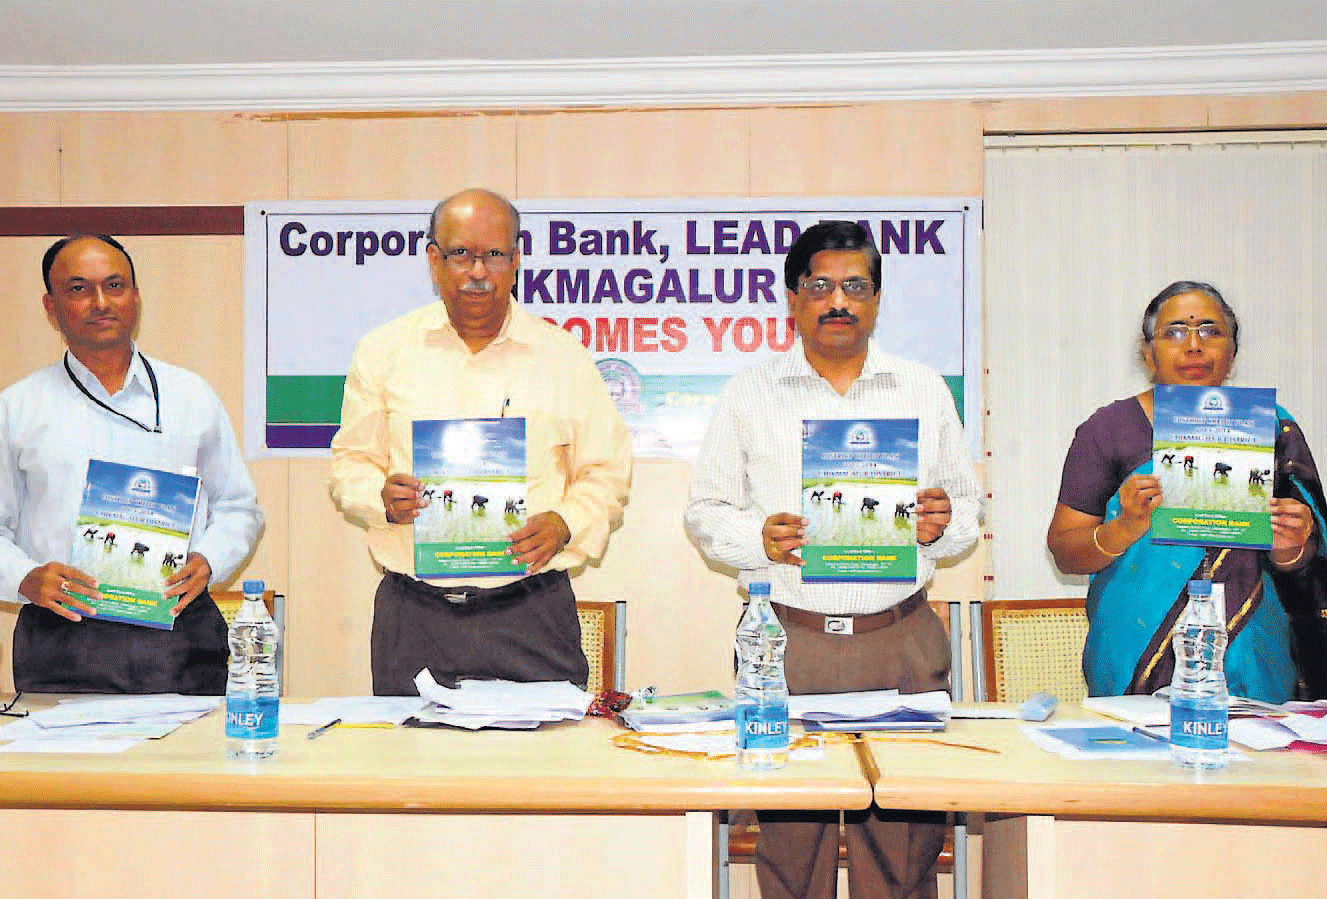 Zilla Panchayat CEO P Shivashankar releases district annual credit plan for 2013-14, in Chikmagalur on Tuesday. Lead Bank Manager N T Narayanamurthy, Reserve Bank Deputy General Manager Parvathi Sharma and Corporation Bank Udupi region Deputy General Manager N Manjunath Shenoy look on.